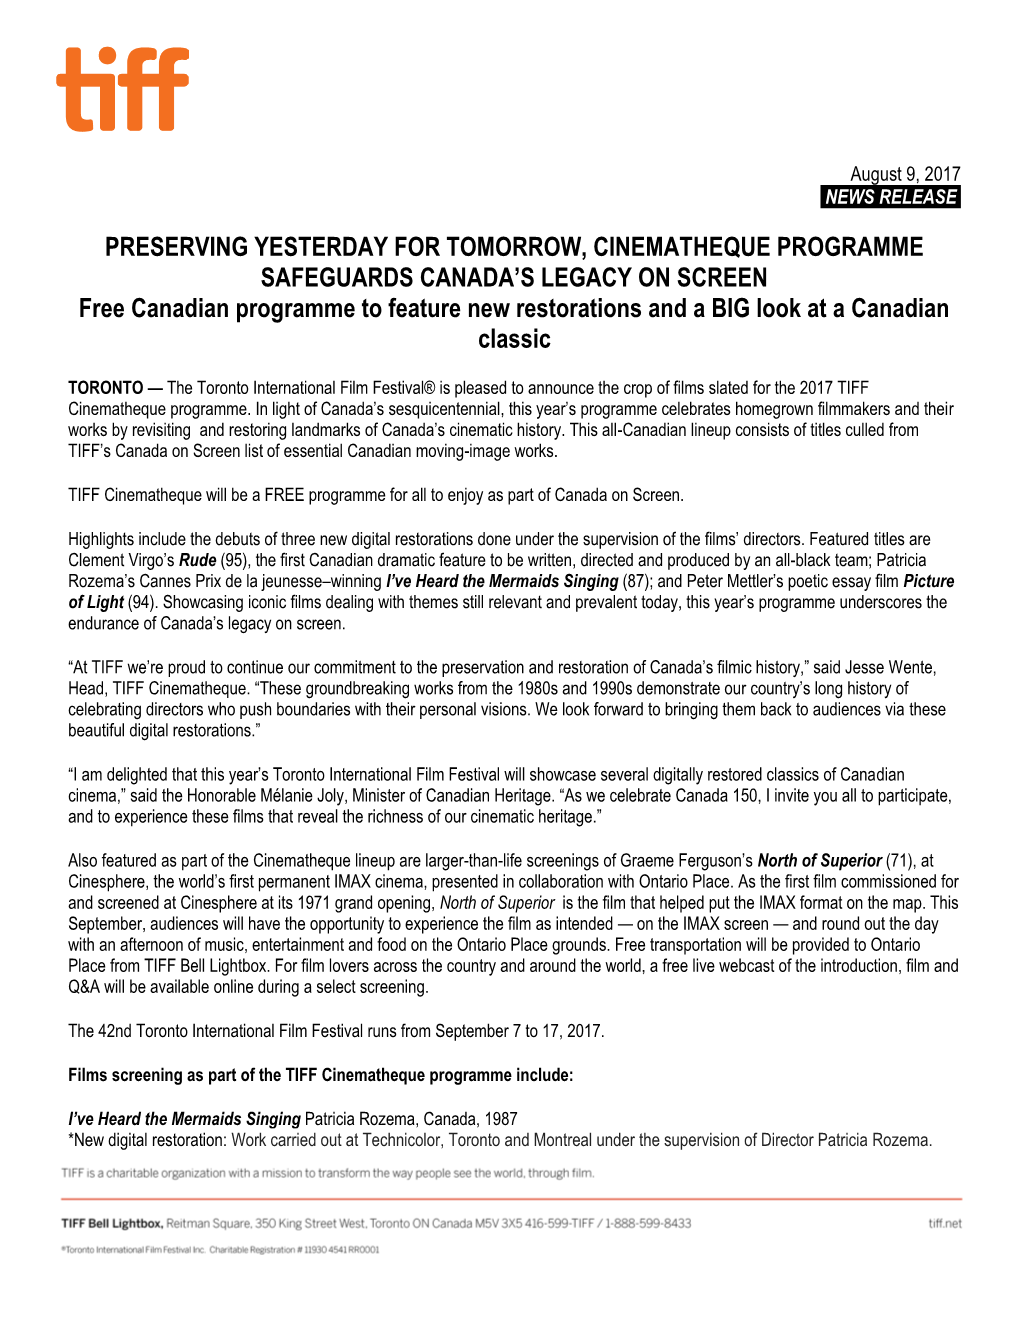 PRESERVING YESTERDAY for TOMORROW, CINEMATHEQUE PROGRAMME SAFEGUARDS CANADA's LEGACY on SCREEN Free Canadian Programme to Feat